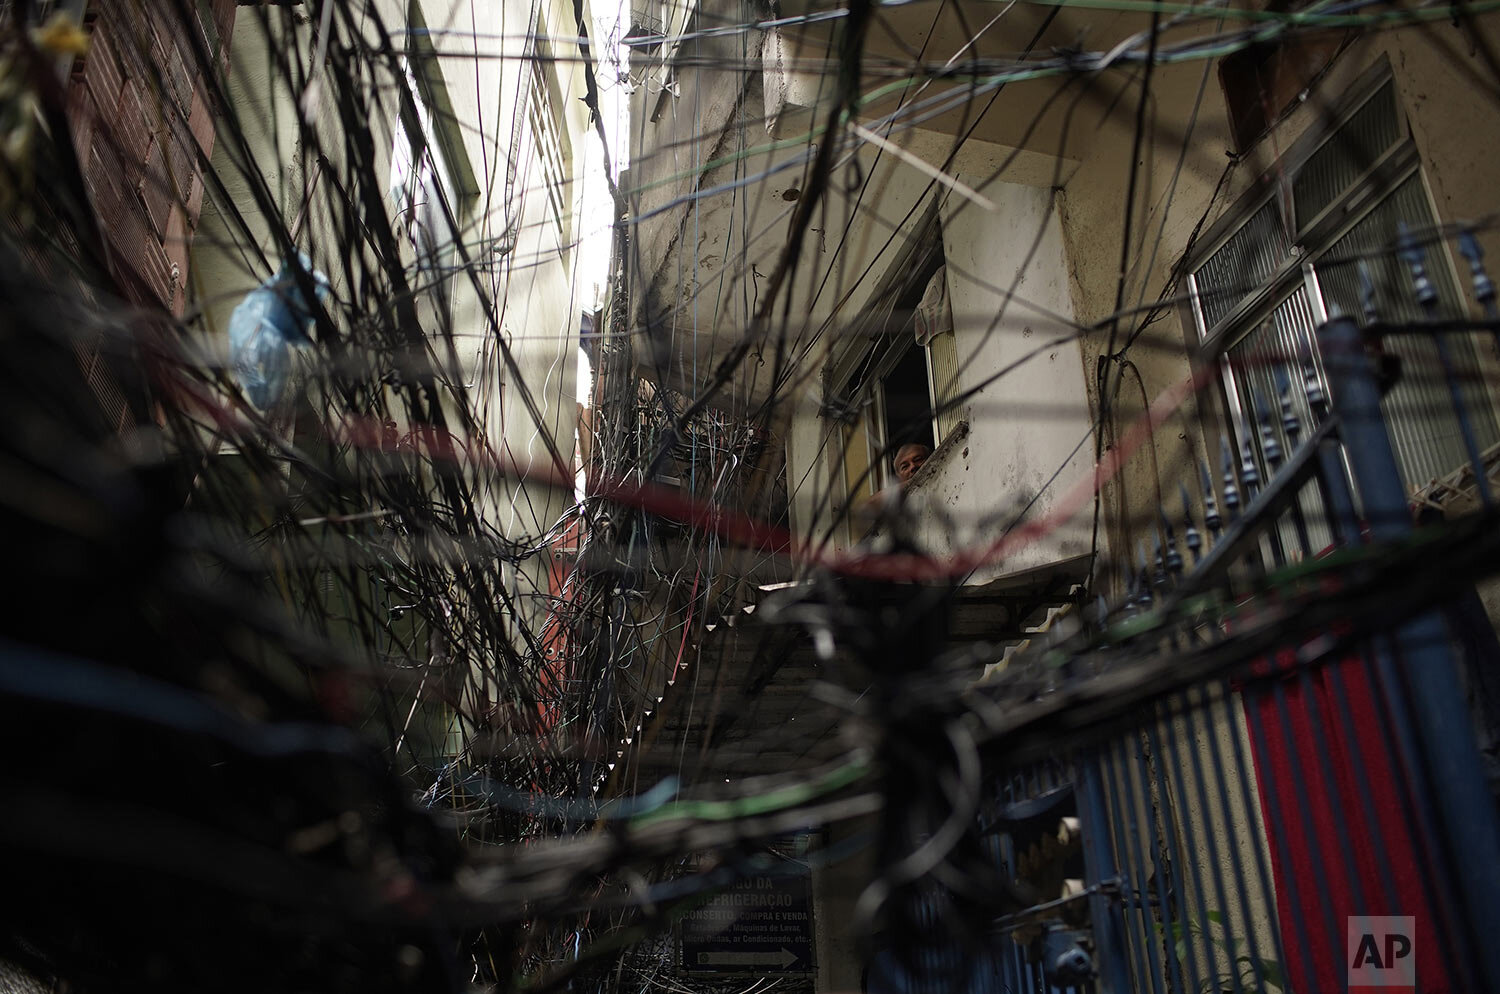  Seen through a web of electric wires, a senior citizen peers from his window in the Rocinha slum of Rio de Janeiro, Brazil, March 20, 2020, as many people stay indoors to avoid getting the new coronavirus. (AP Photo/Silvia Izquierdo) 